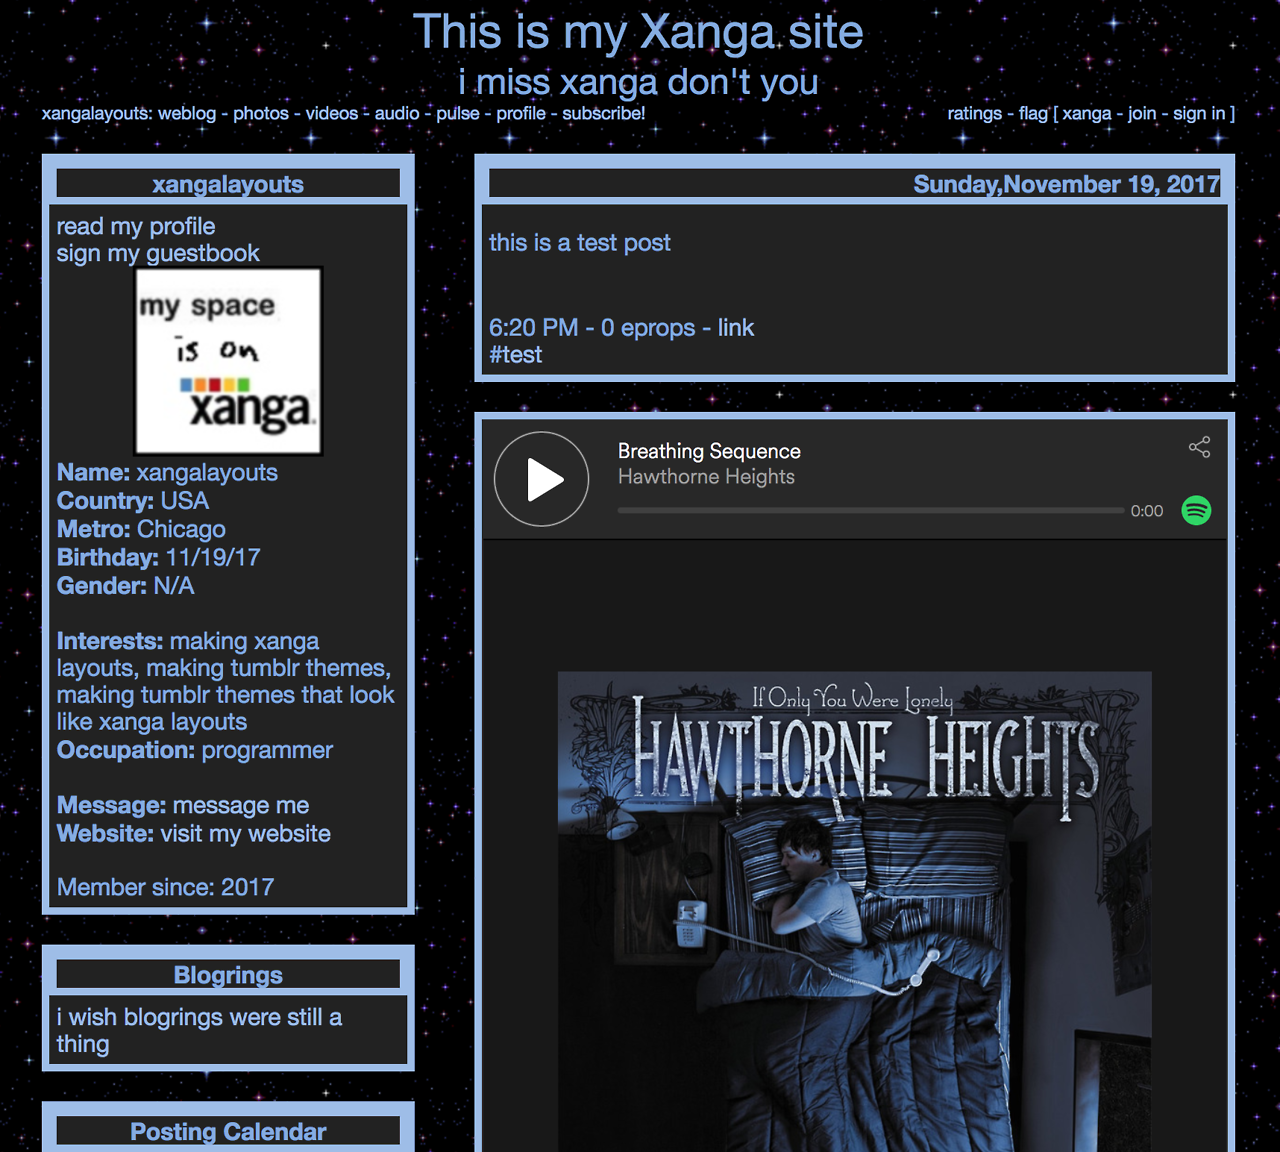 introducing xangalayouts.XANGALAYOUTS is a new tumblr theme that turns your tumblr into a 2006-era xanga site, complete with classic xanga header/footer links and many customization options.
Options:
• Site title/subtitle
• Header Image/Background...